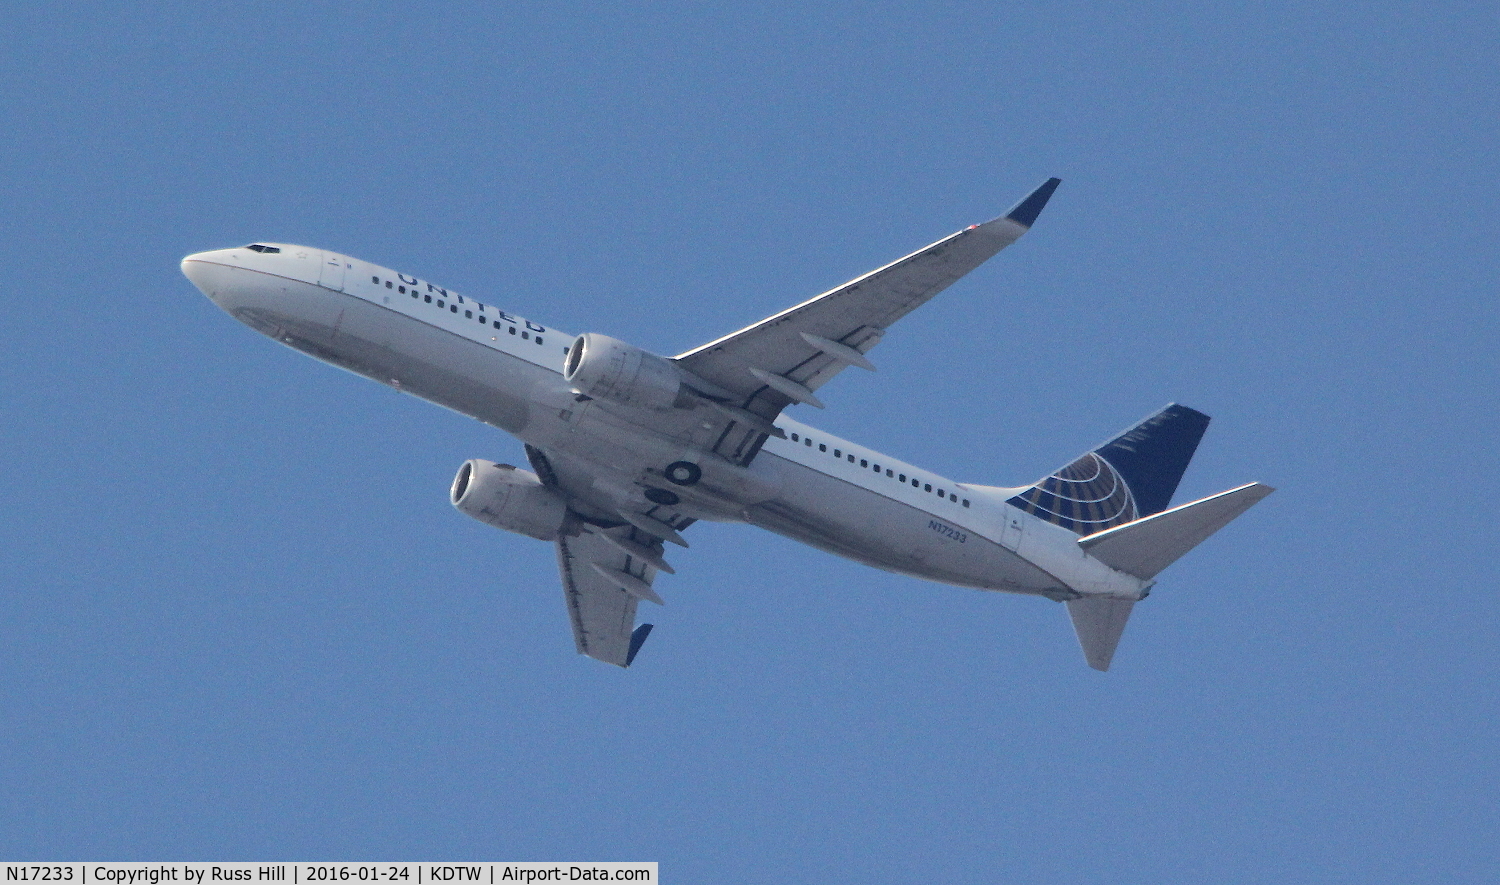 N17233, 1999 Boeing 737-824 C/N 28943, On approach to DTW, approx. 15 miles out